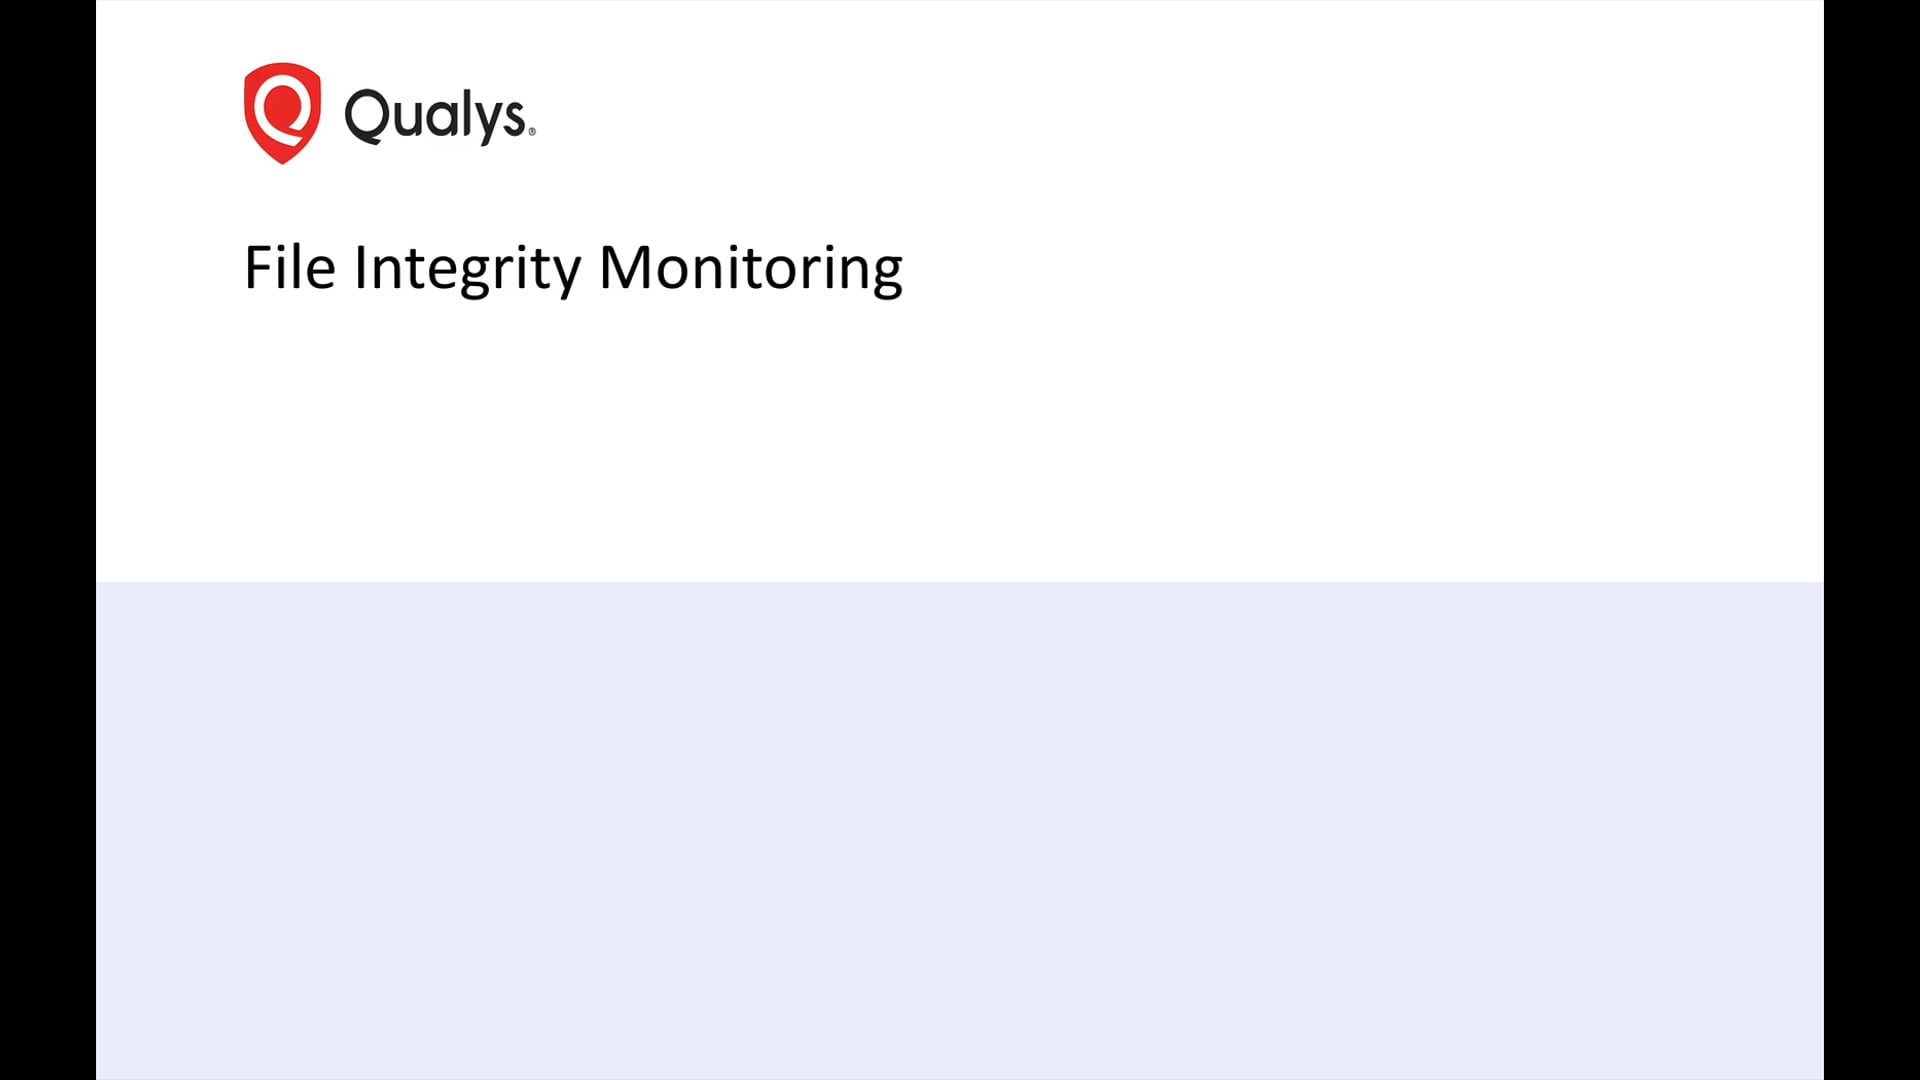 Qualys File Integrity Monitoring